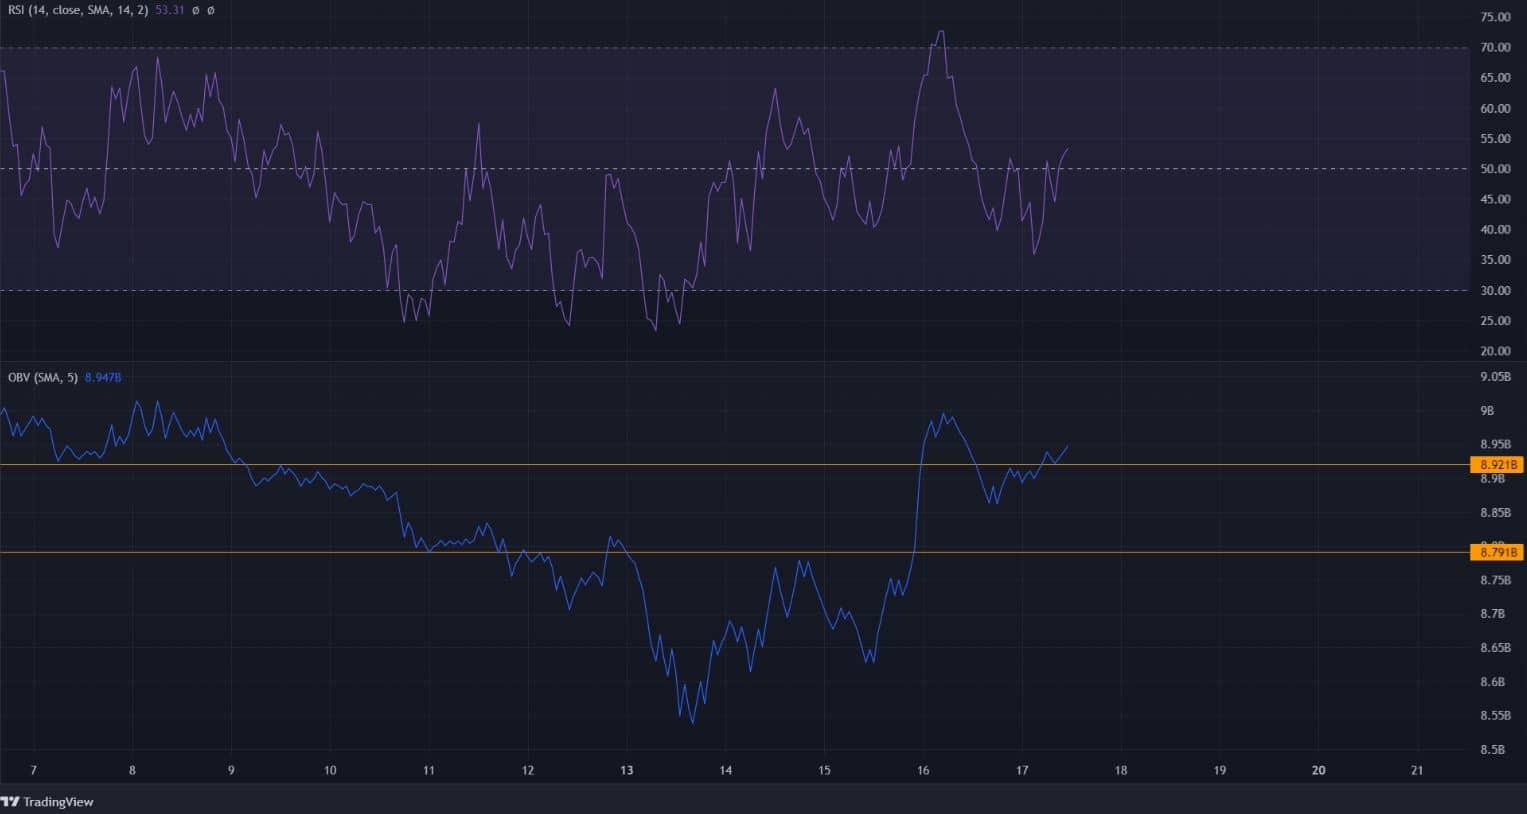 Here are the two important horizontal levels for Cardano to overcome before a near-term bulltrend